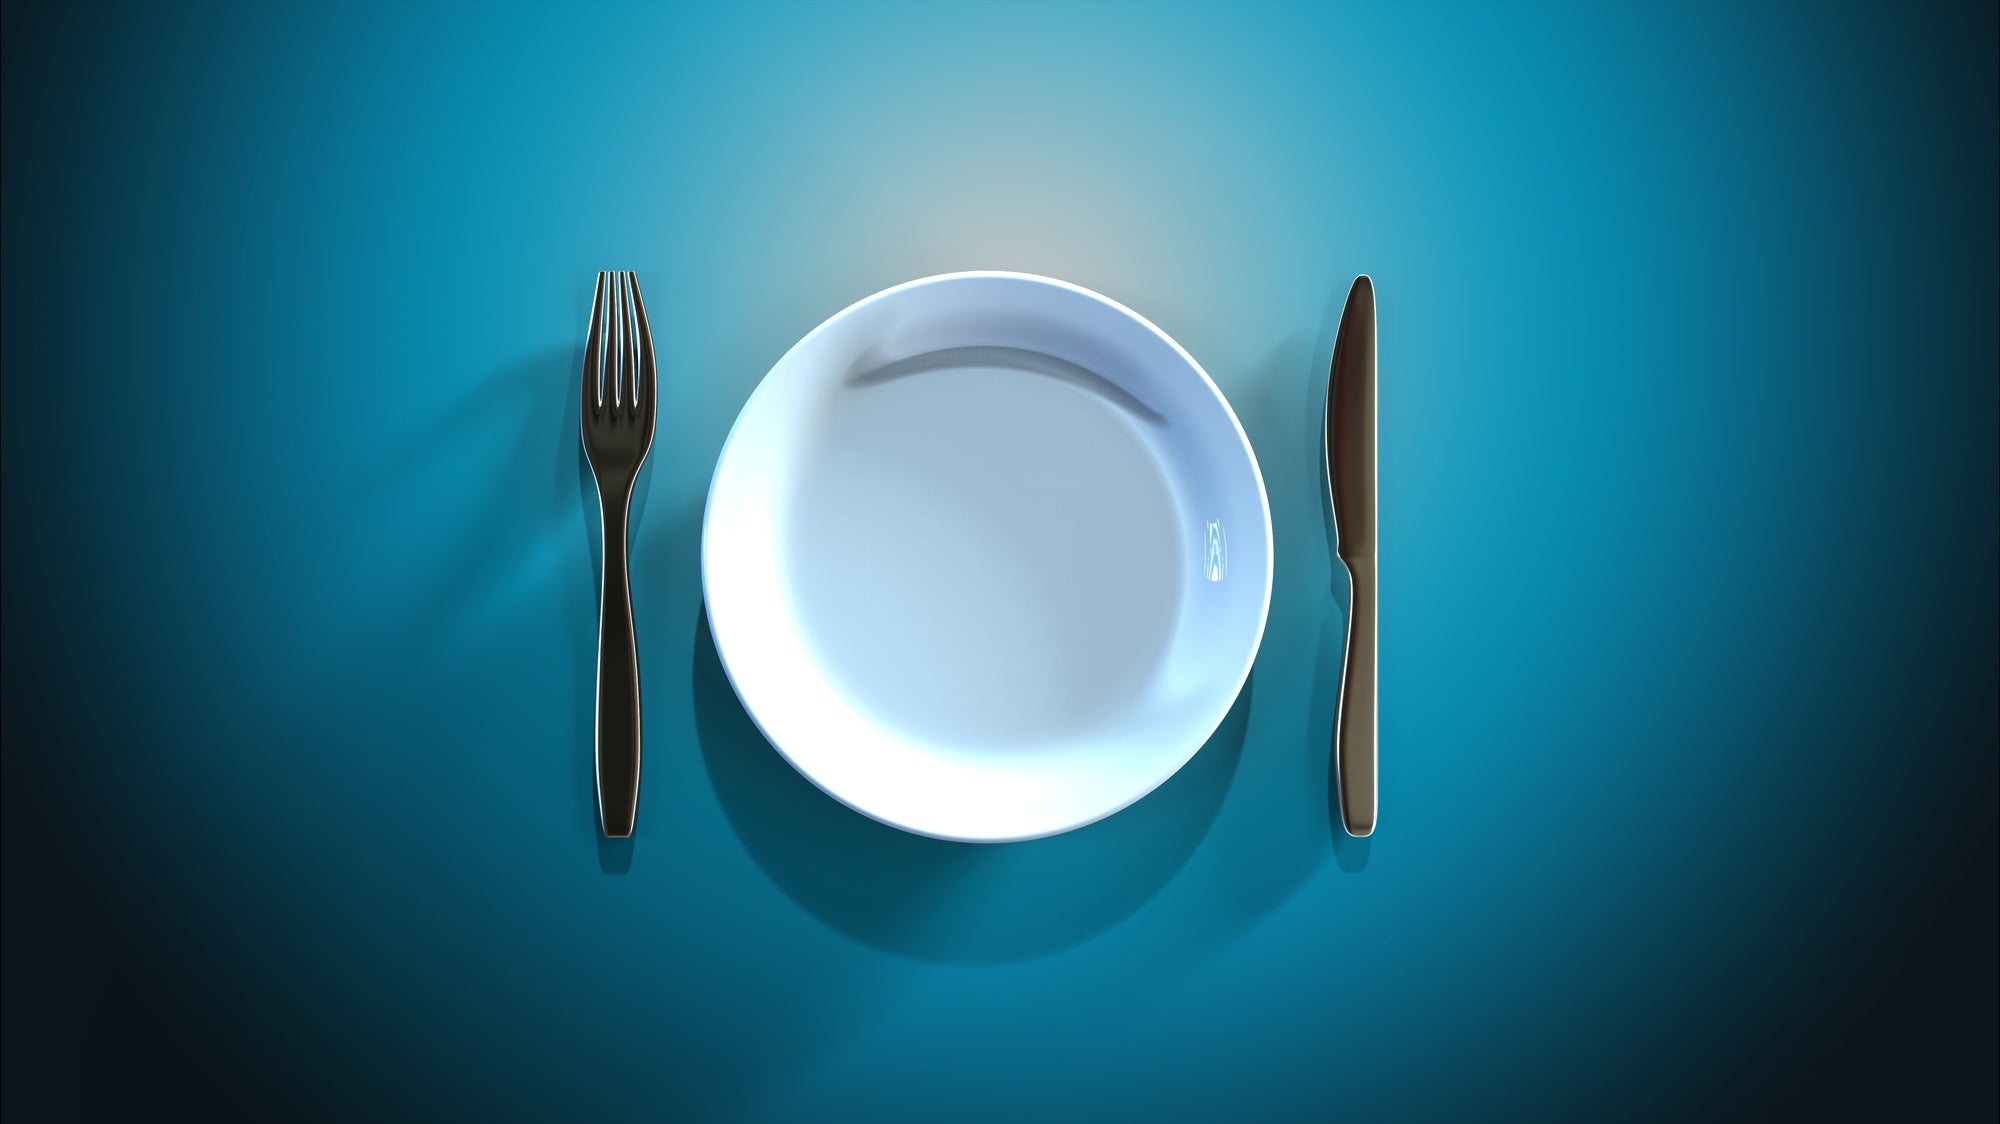 Is There A Healthy Way To Diet? The Science Behind Fasting